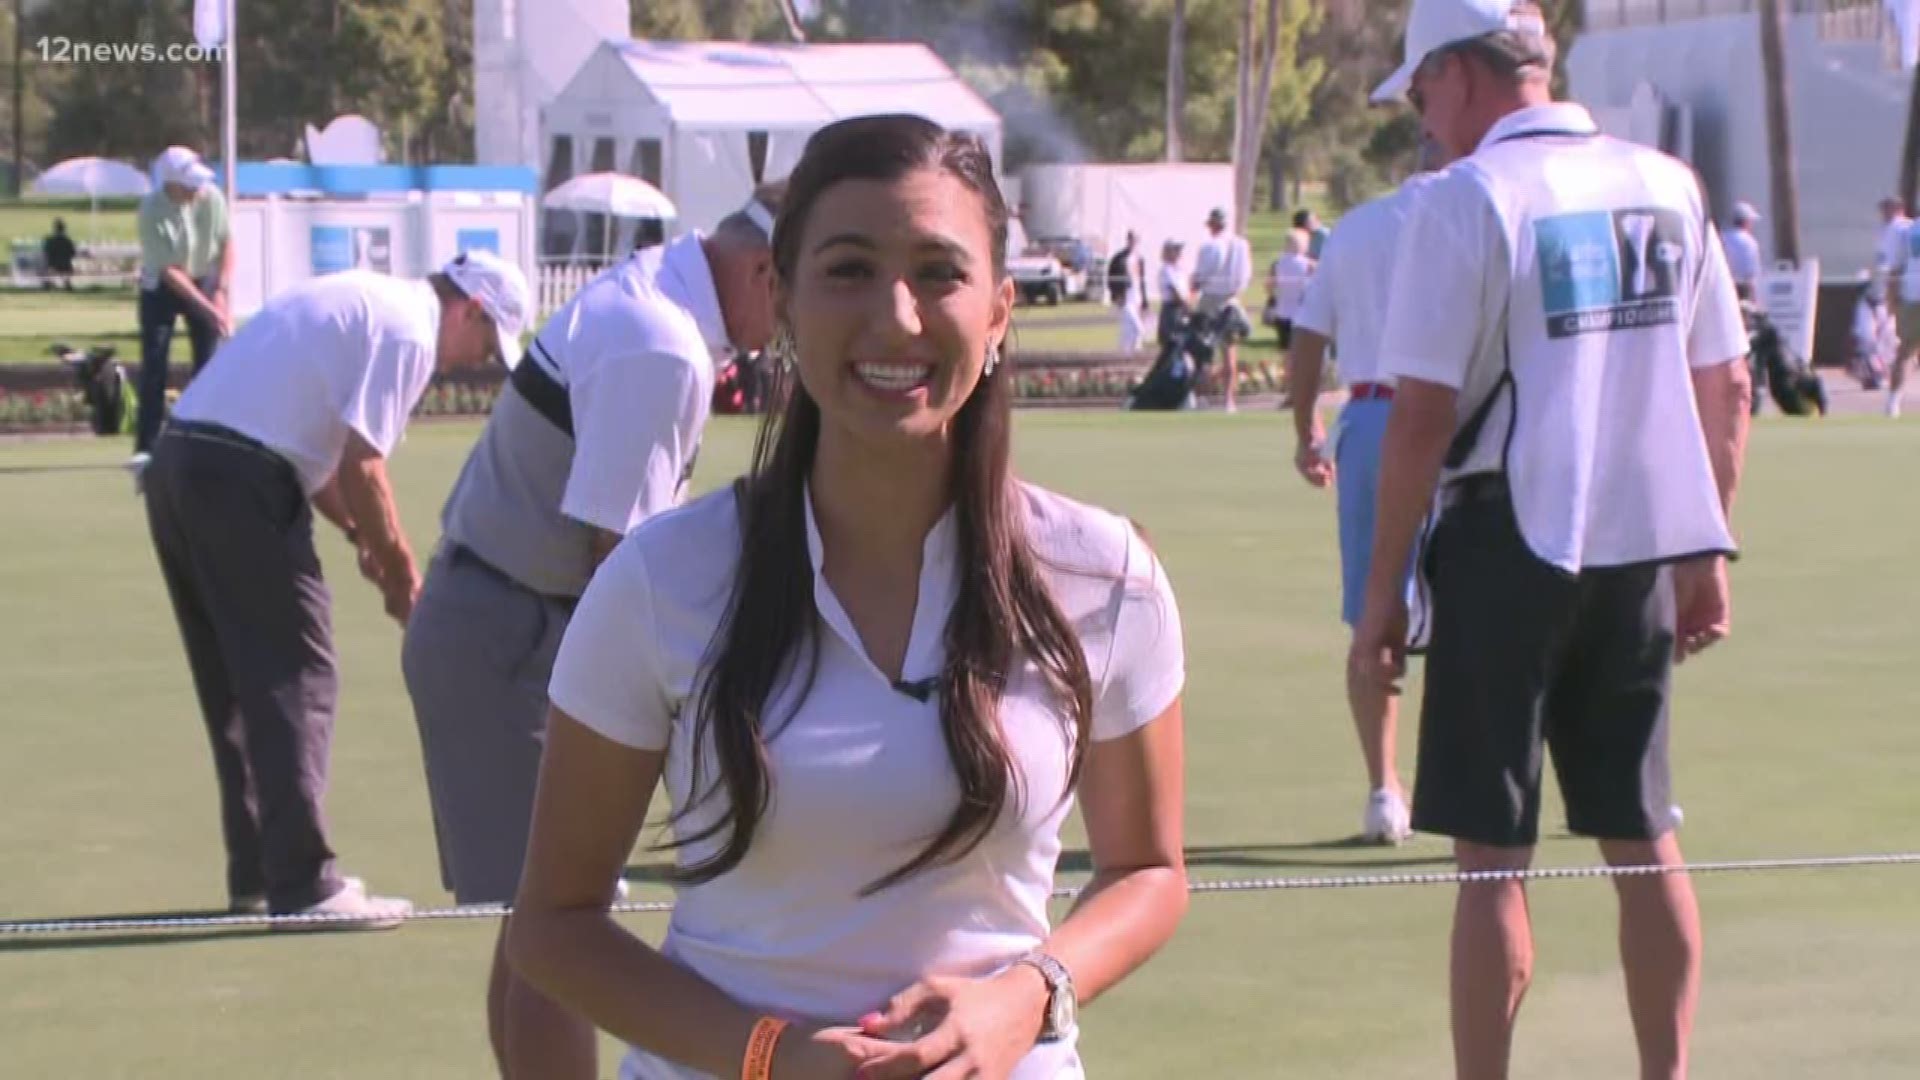 The Charles Schwab Cup Championship is at Phoenix Country Club until Sunday. We give you an all-access pass to the behind-the-scenes action.